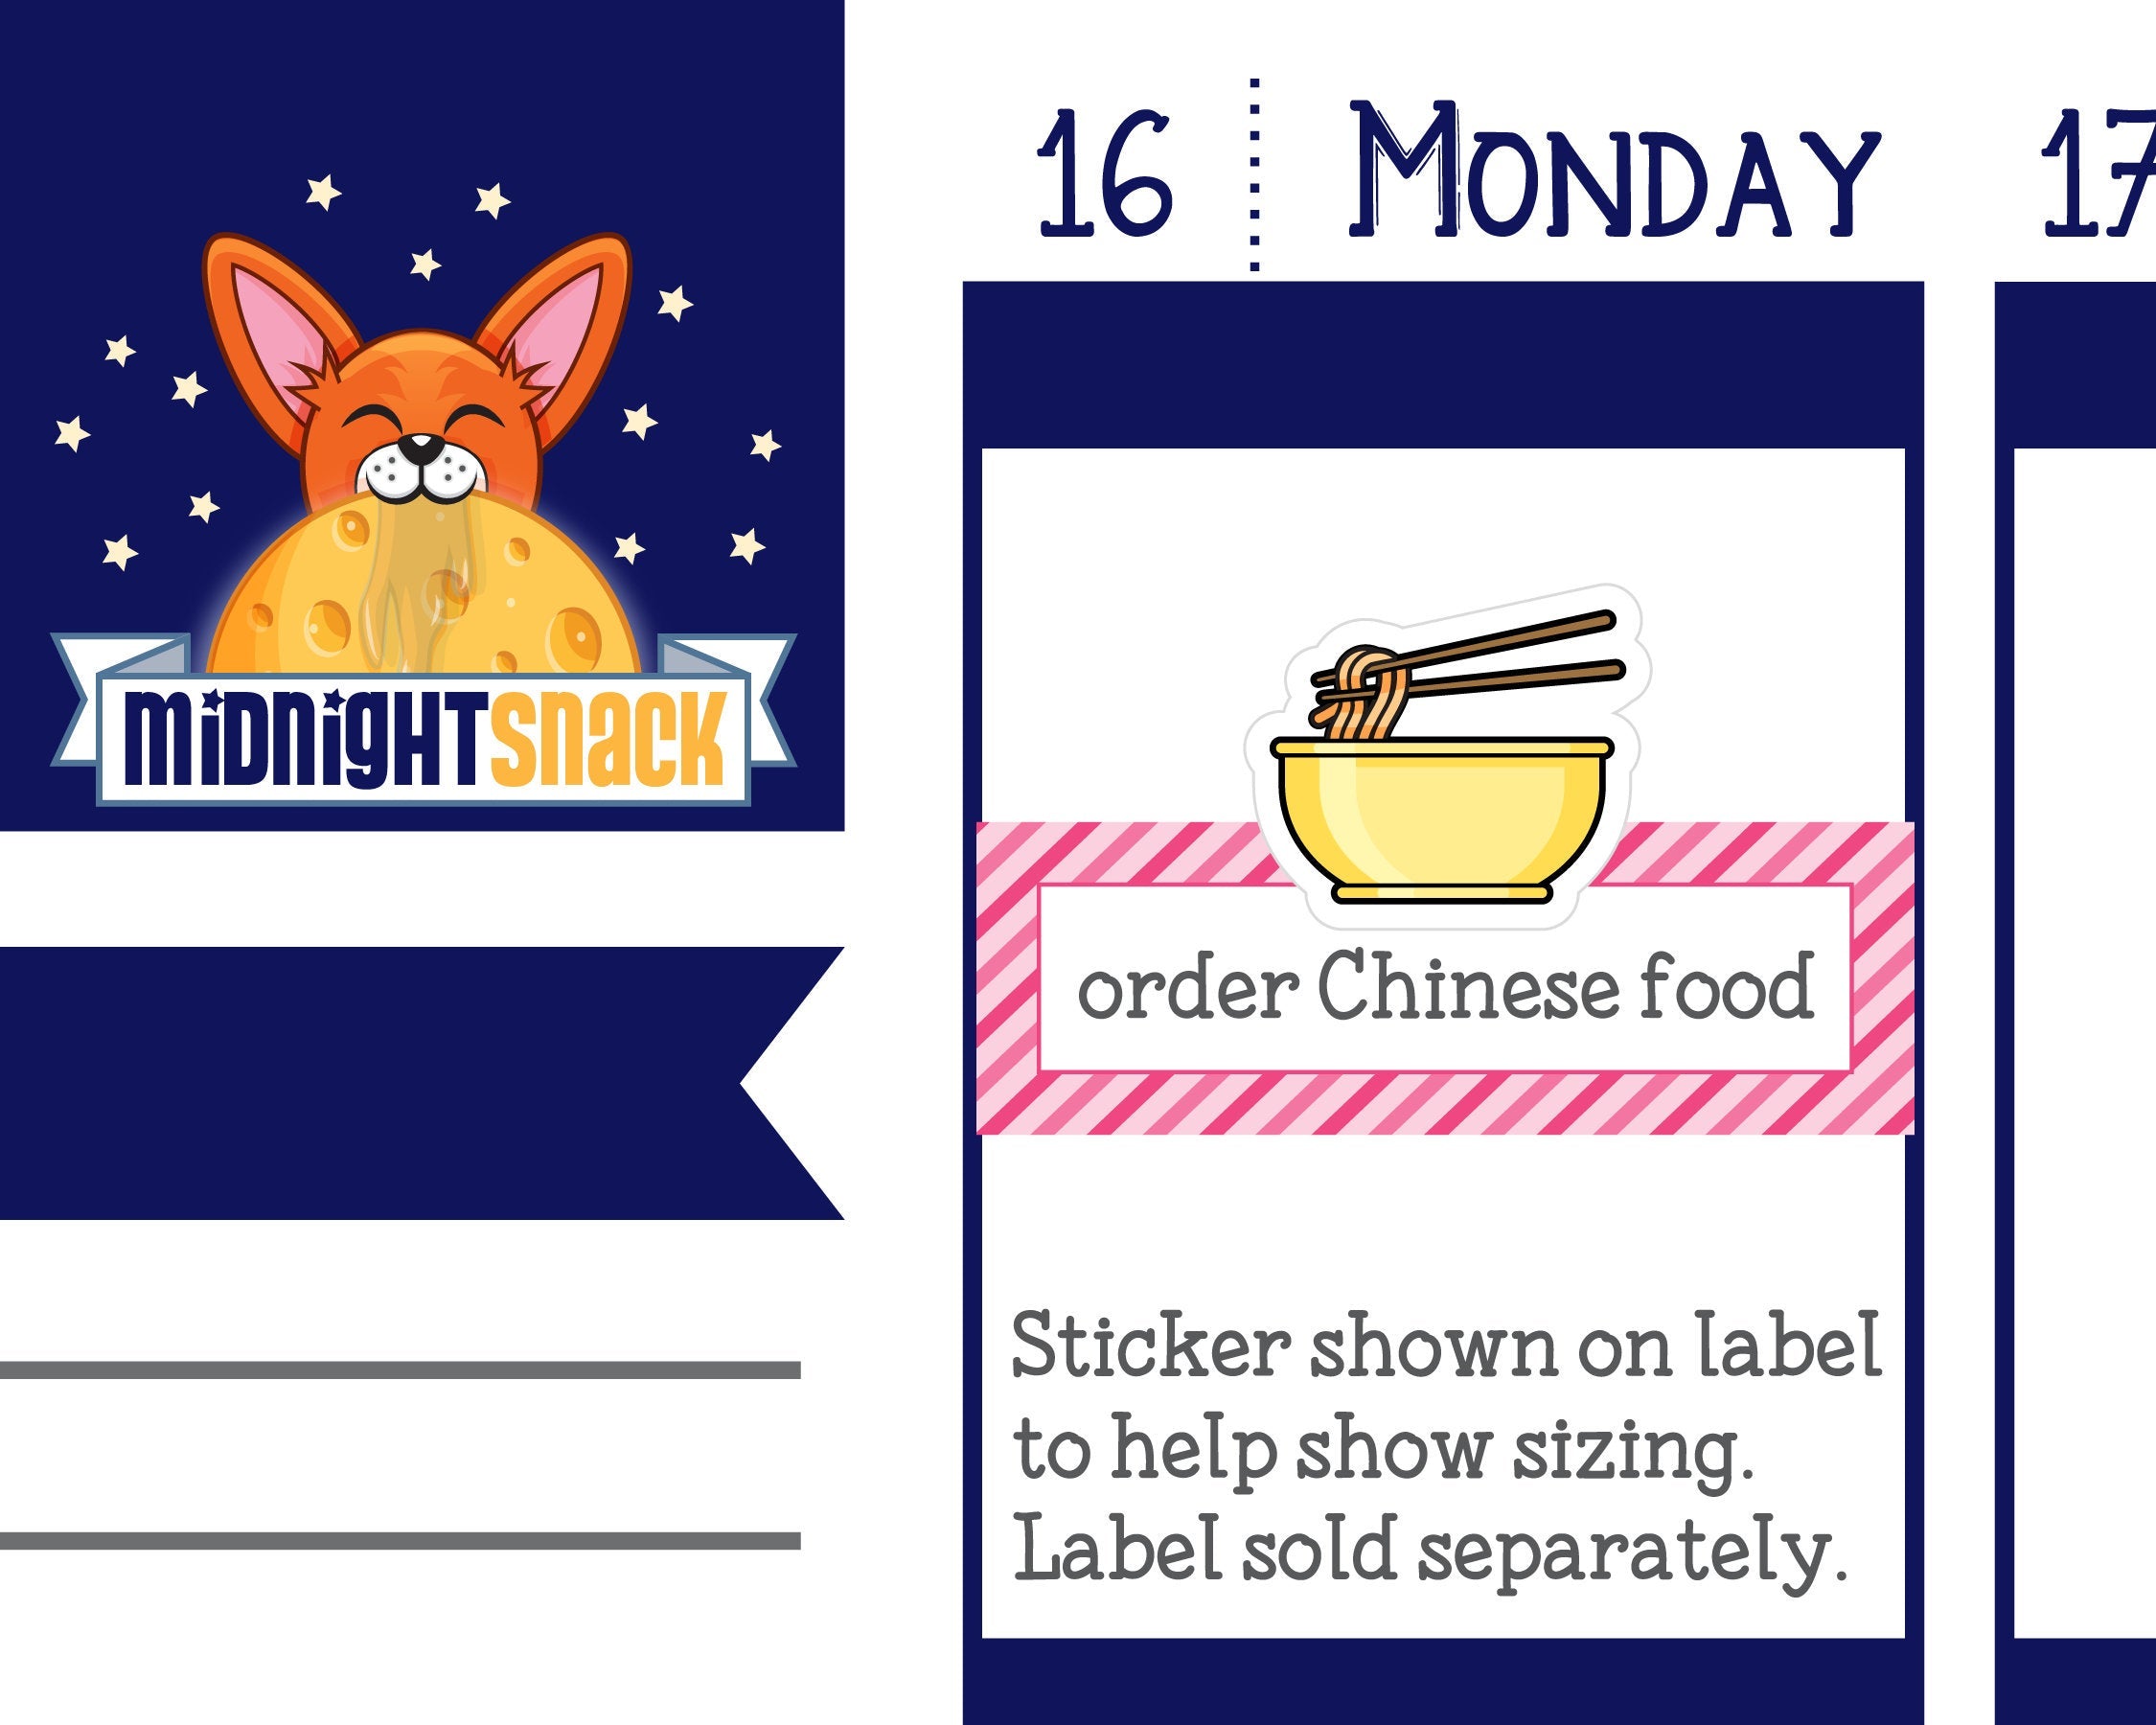 Order Asian Food Icon: Meal Planning Planner Stickers Midnight Snack Planner